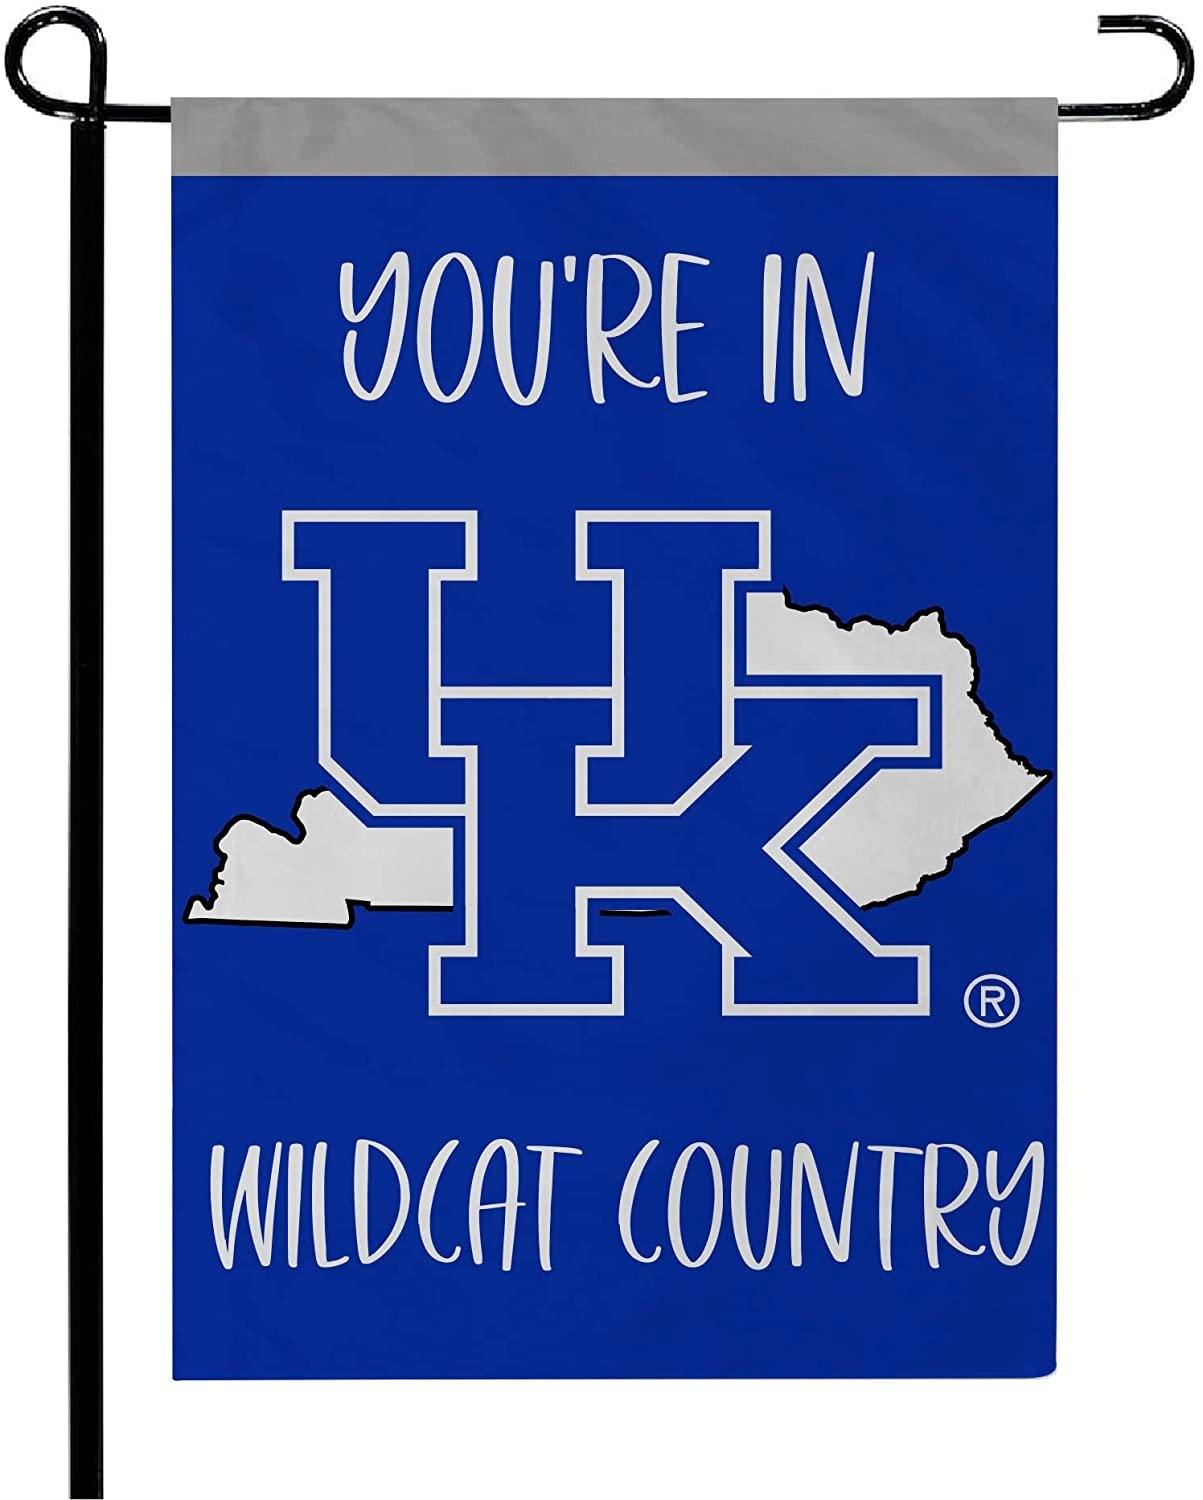 University of Kentucky Wildcats Double Sided Garden Flag Banner 12x18 Inch Country Design